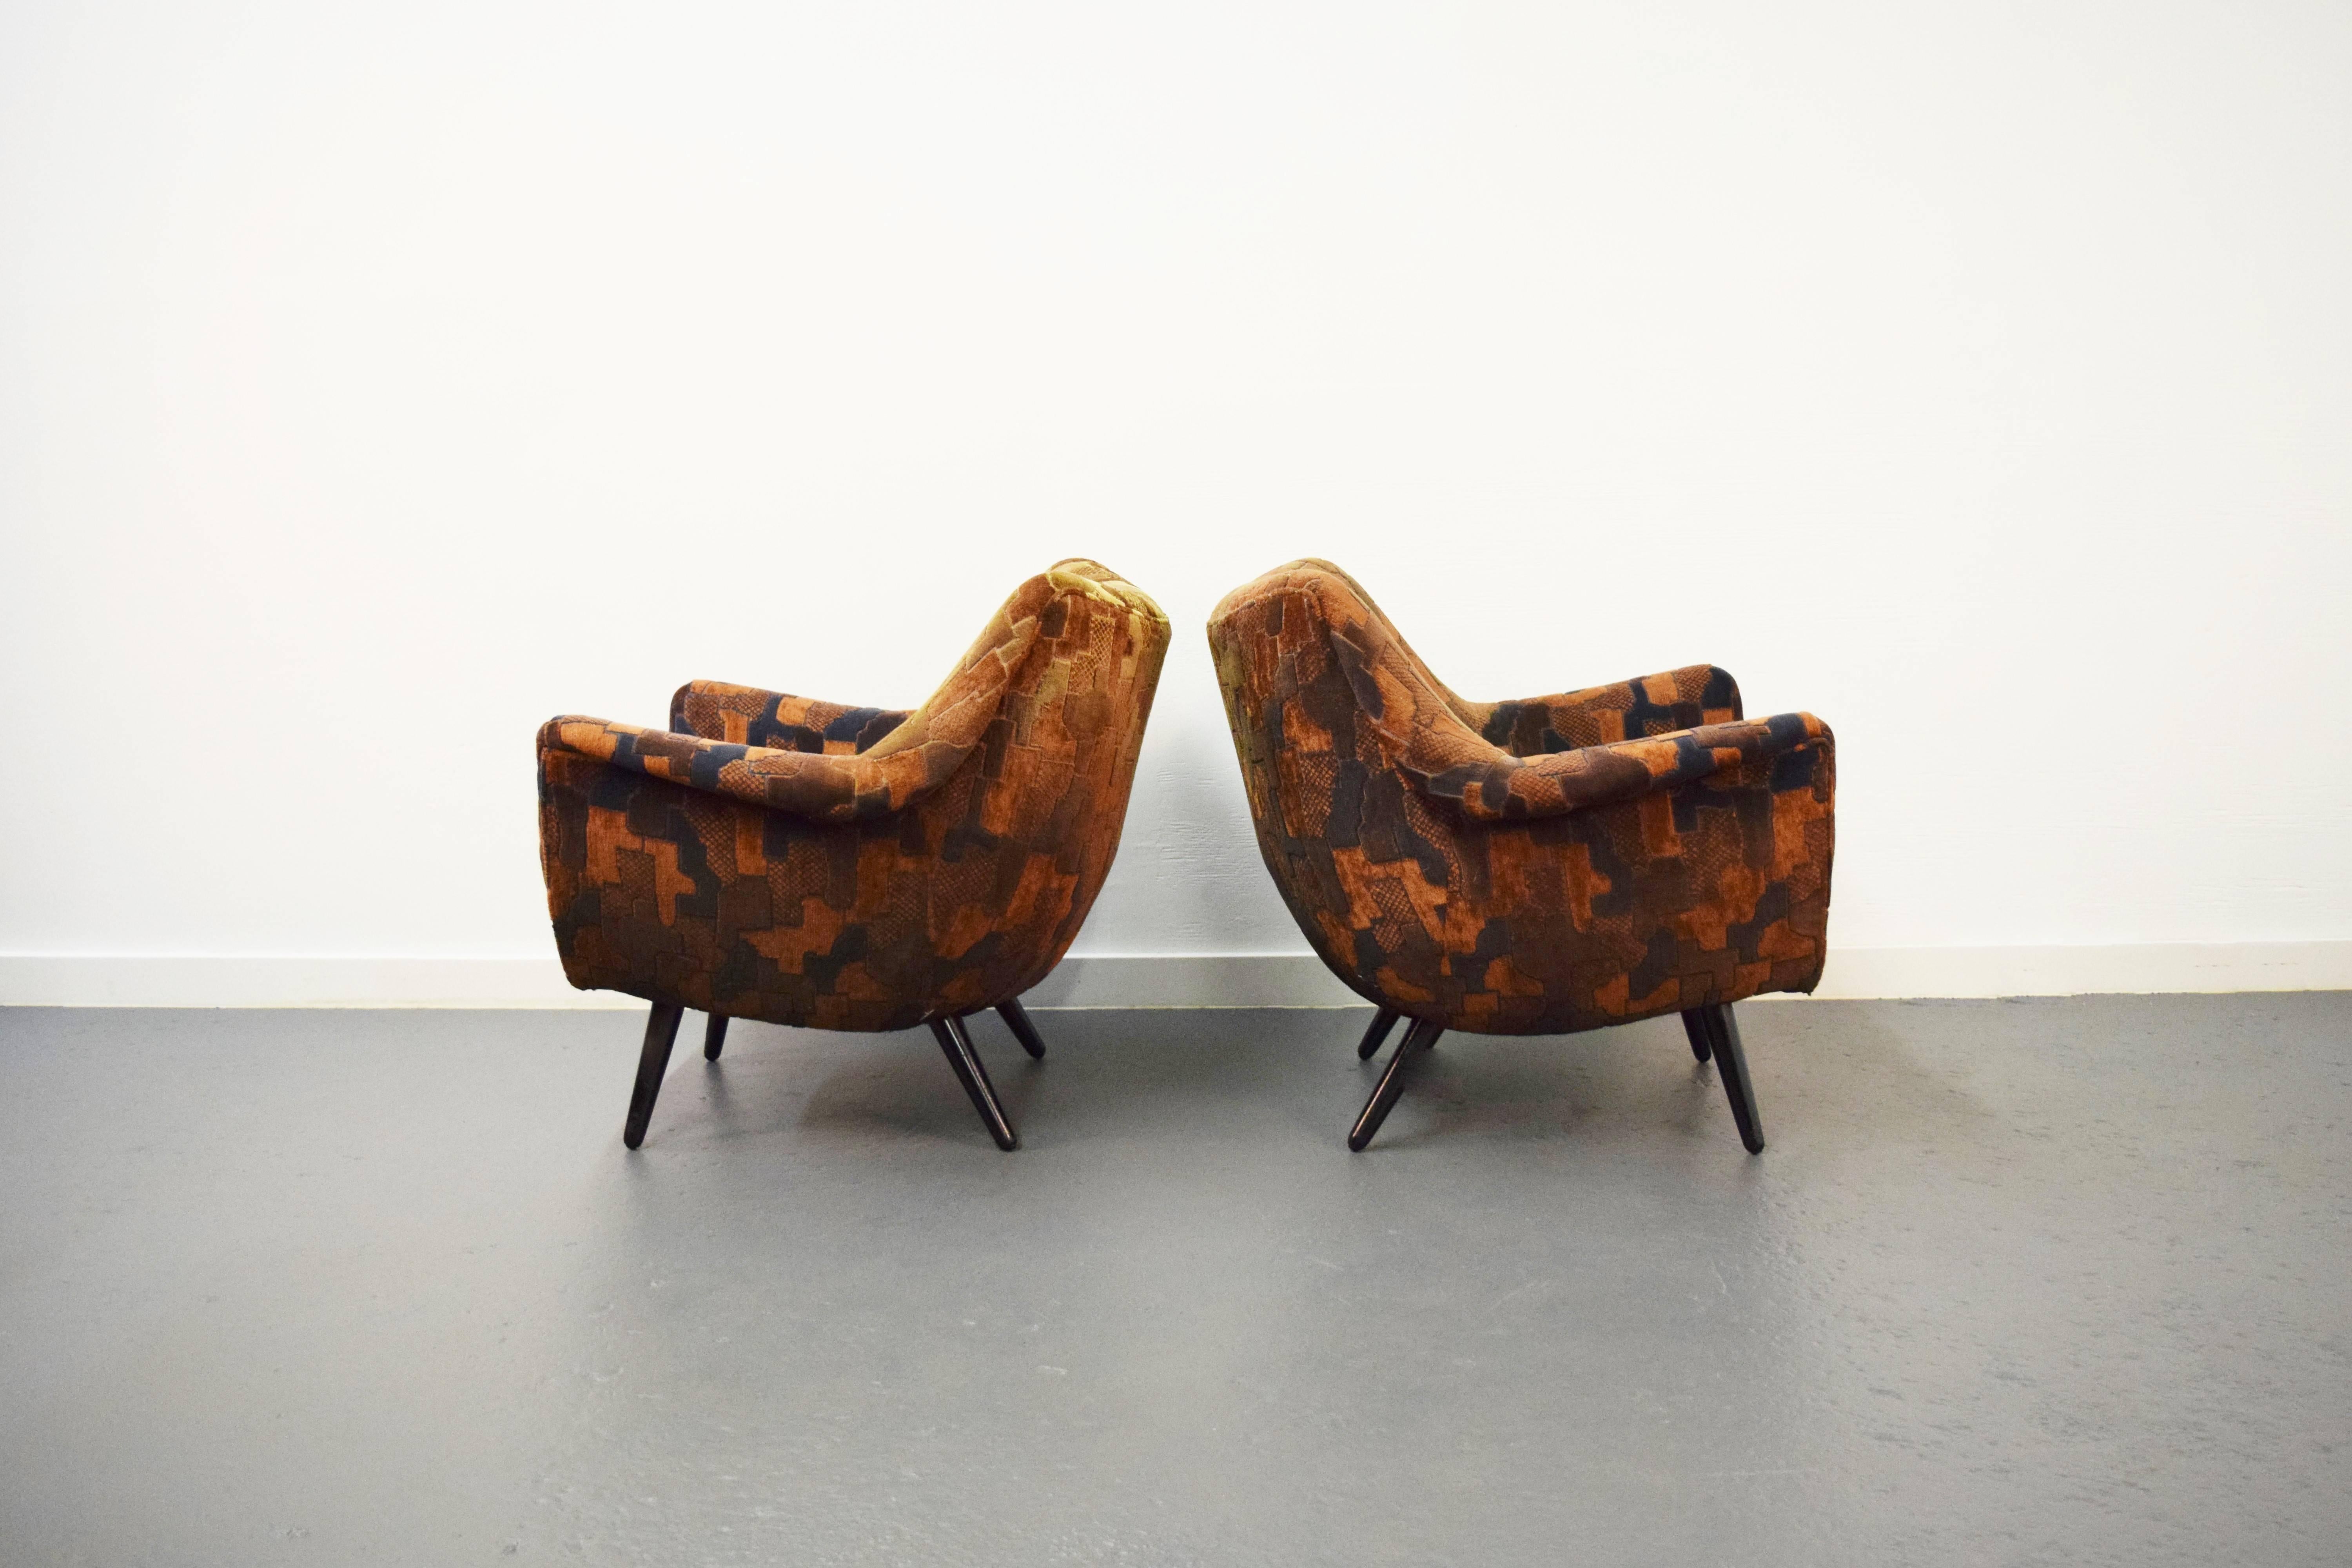 Pair of sculptural Lawrence Peabody lounge chairs.